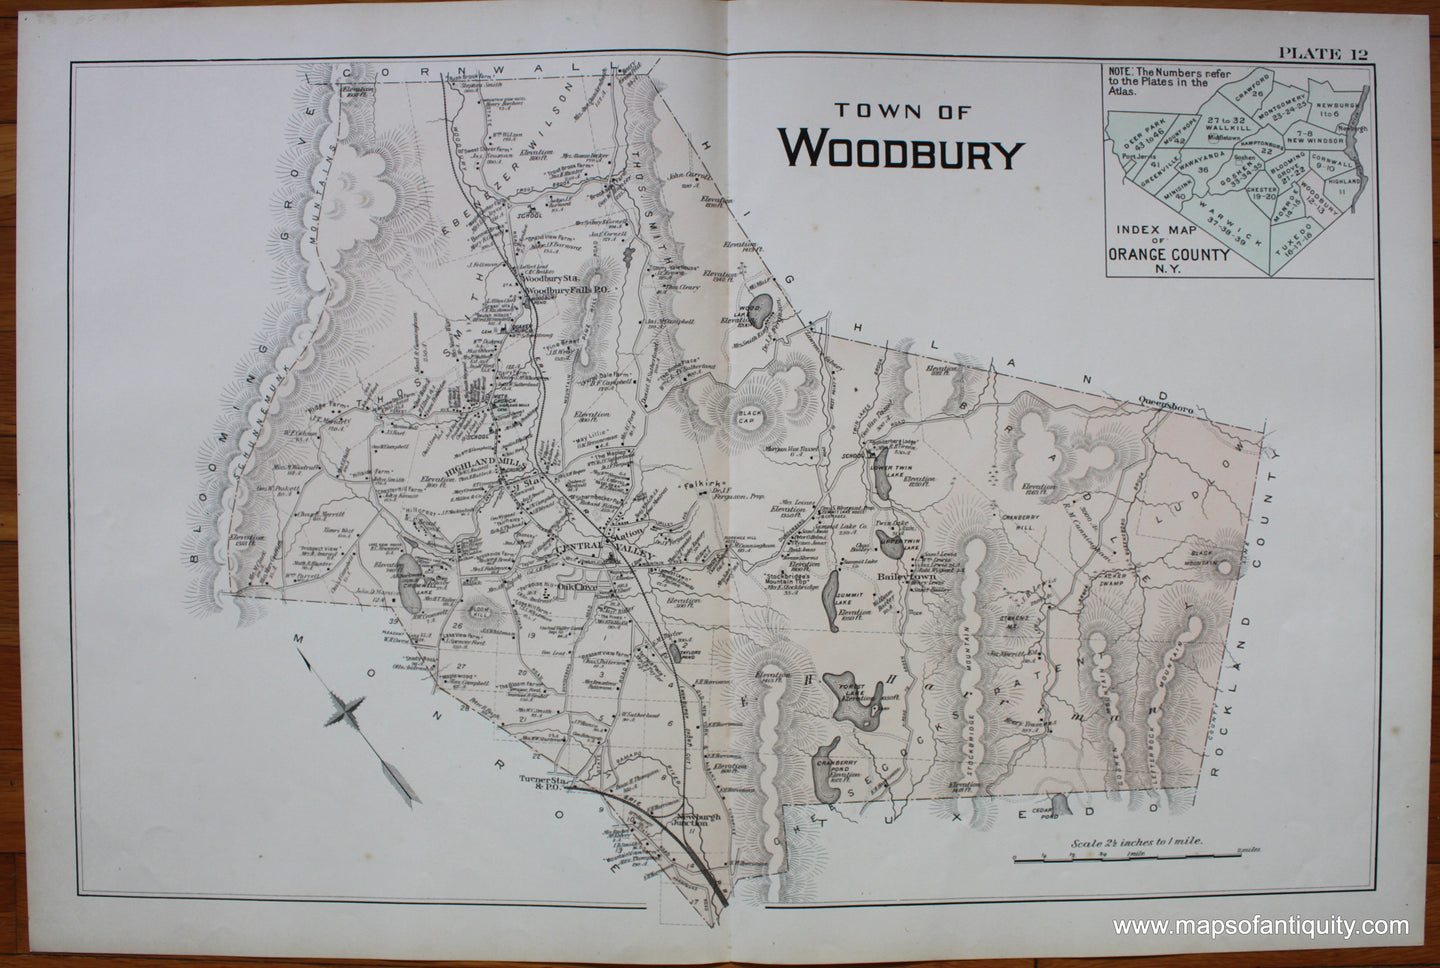 Antique-Printed-Color-Map-Town-of-Woodbury-NY-1903-Lathrop-A.-H.-Mueller-&-Co-New-York-1800s-19th-century-Maps-of-Antiquity